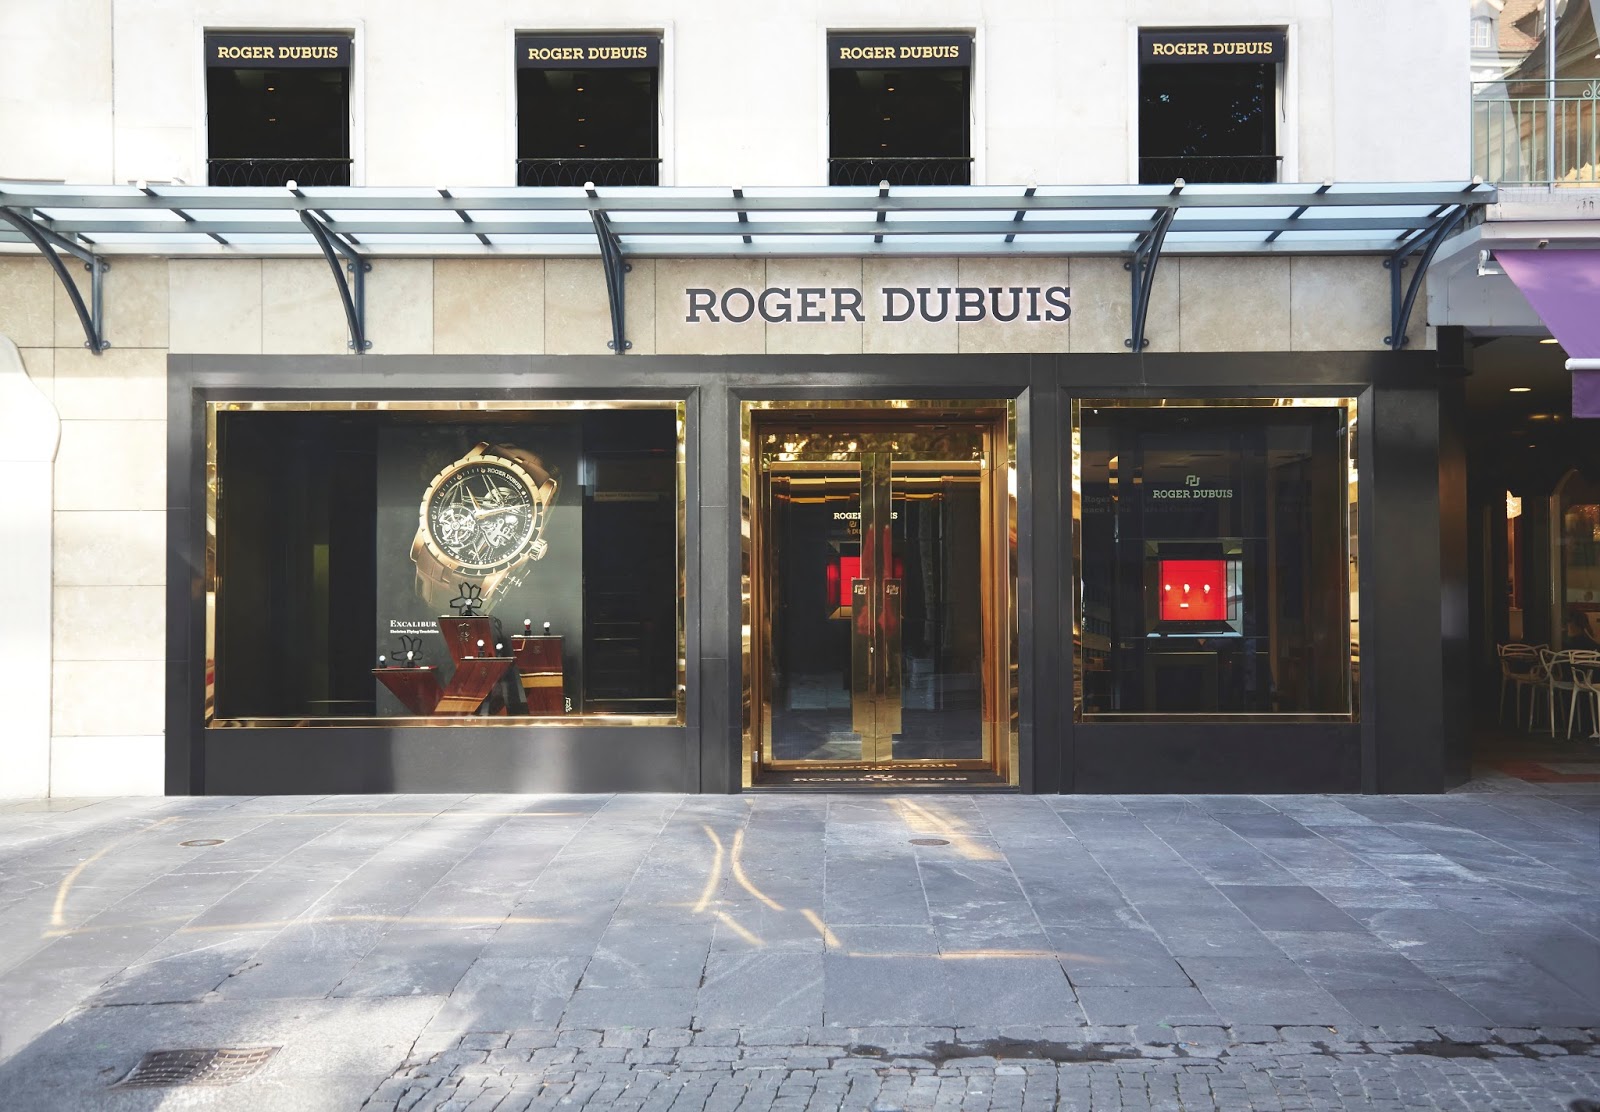 Kee Hua Chee Live!: ROGER DUBUIS OPENS STUNNING NEW BOUTIQUE IN THE ...